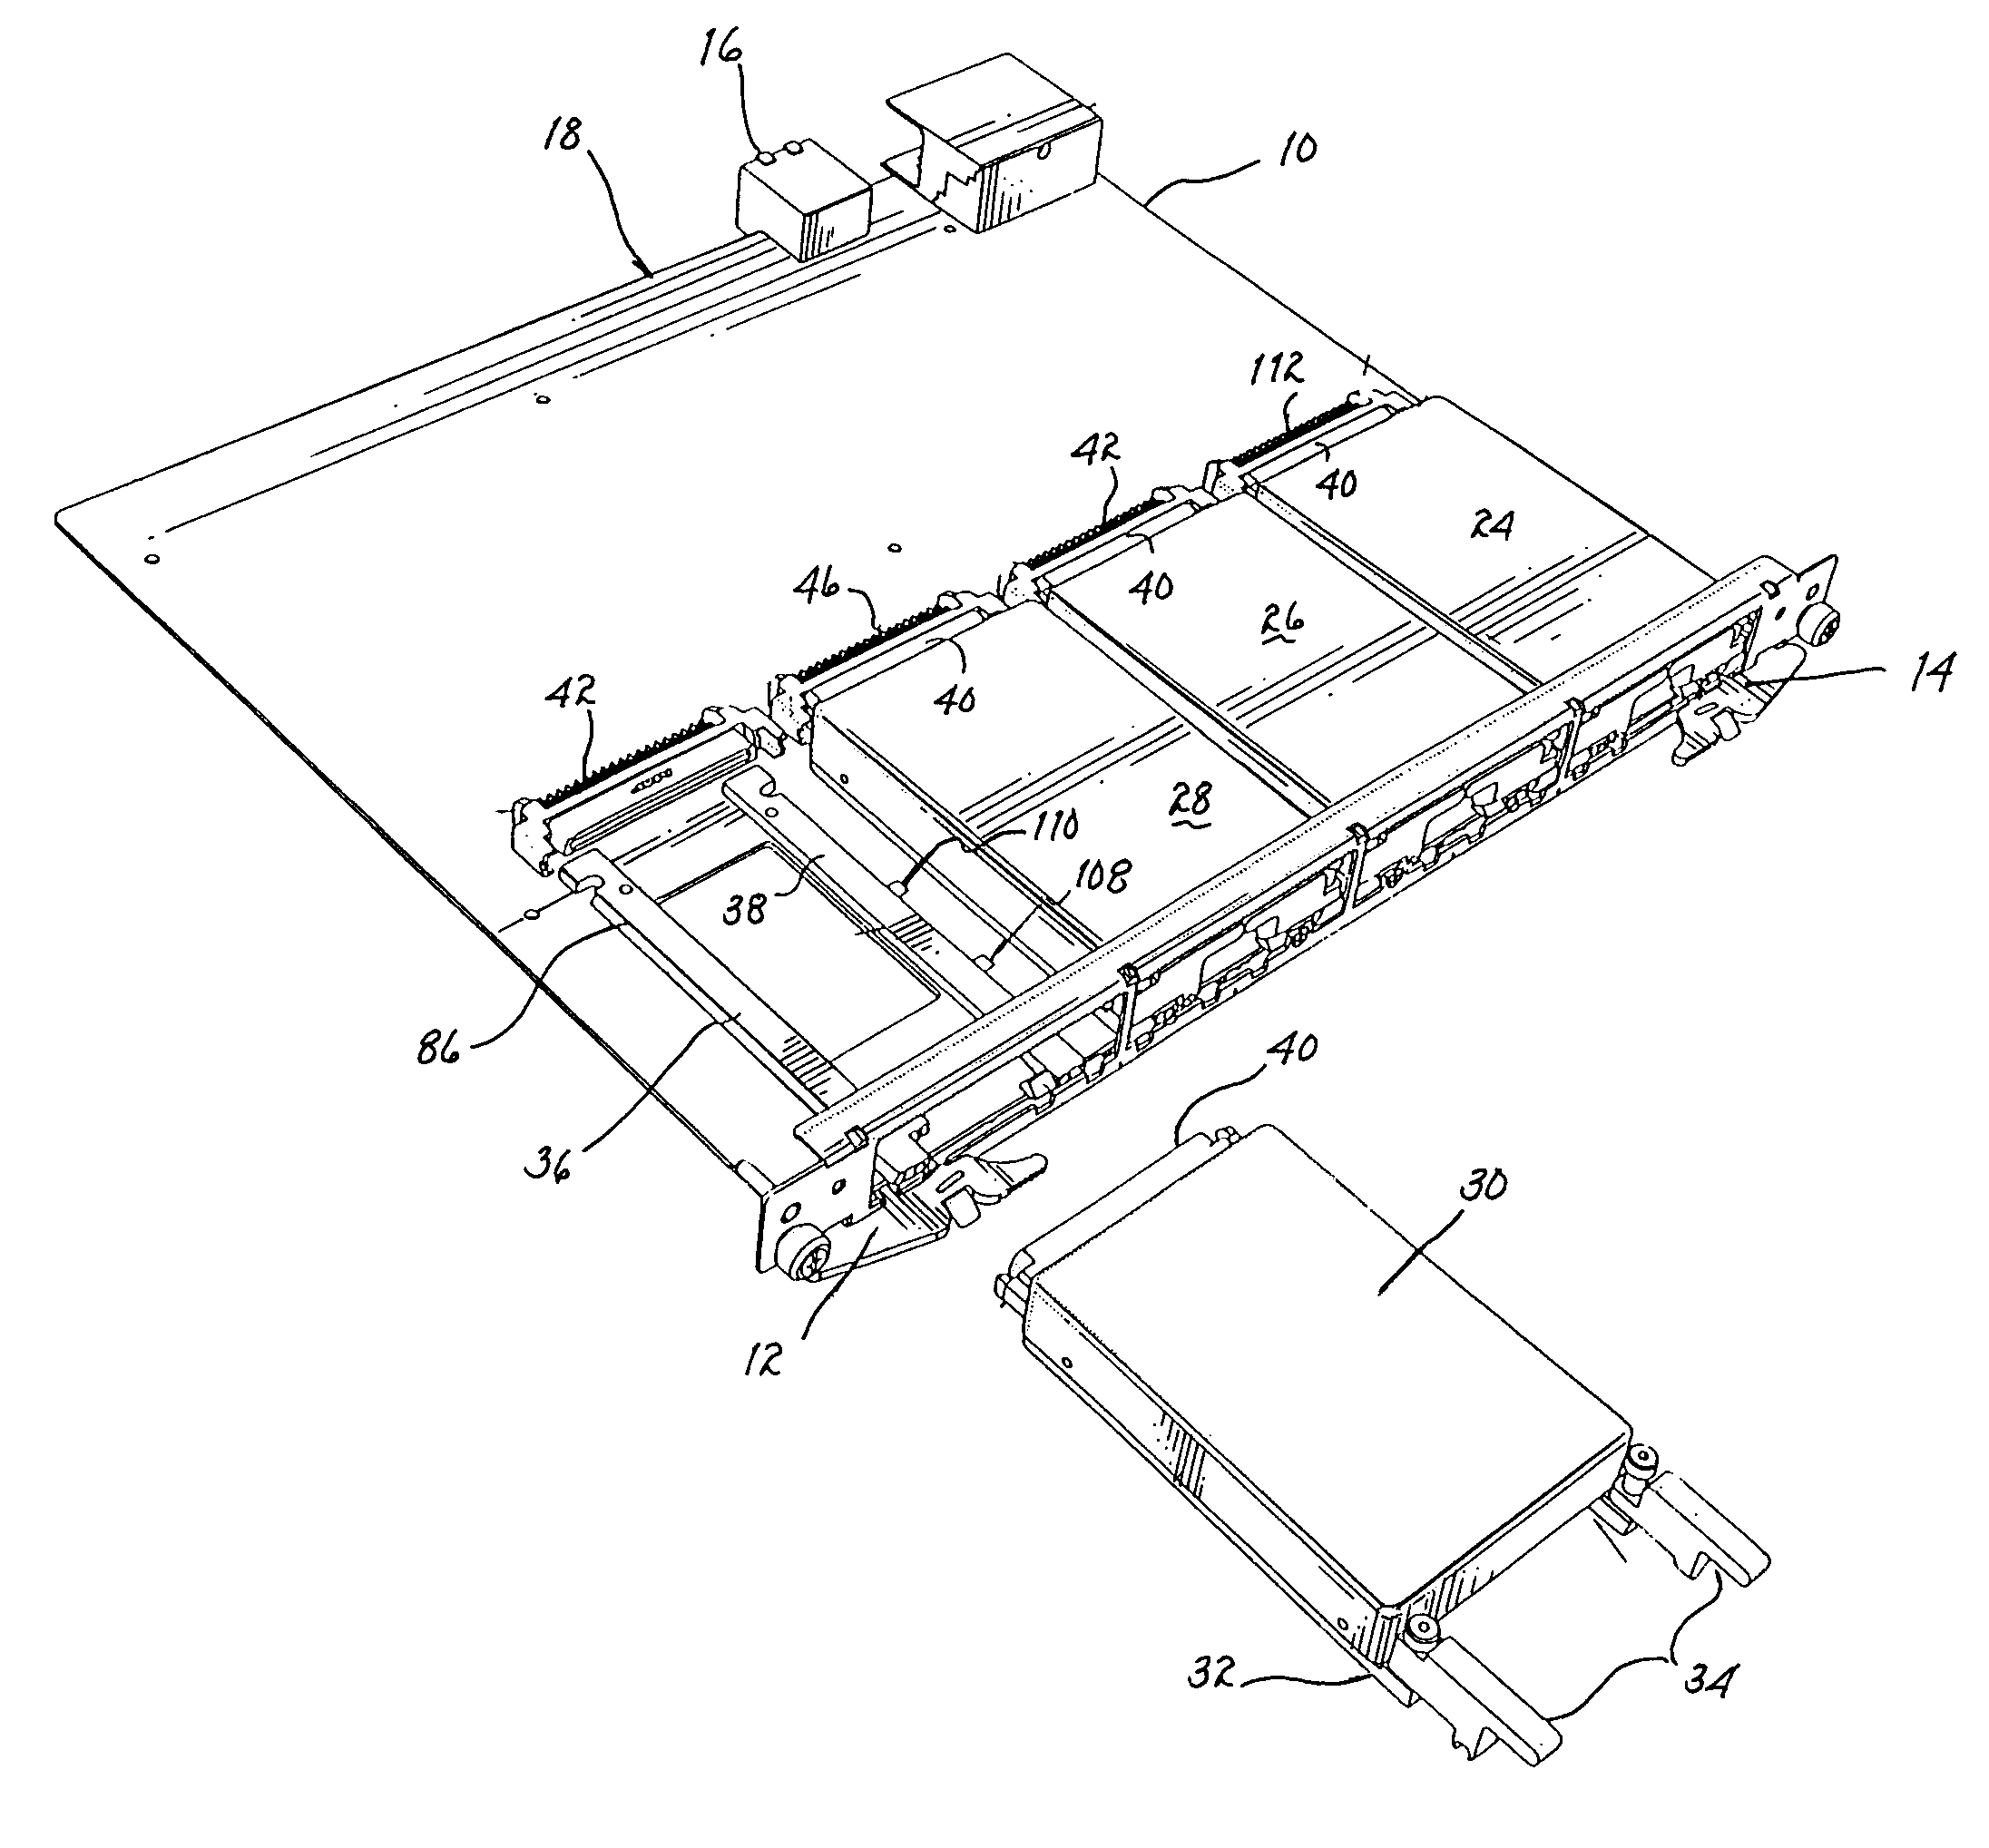 Apparatus for inserting, retaining and extracting a device from a compartment